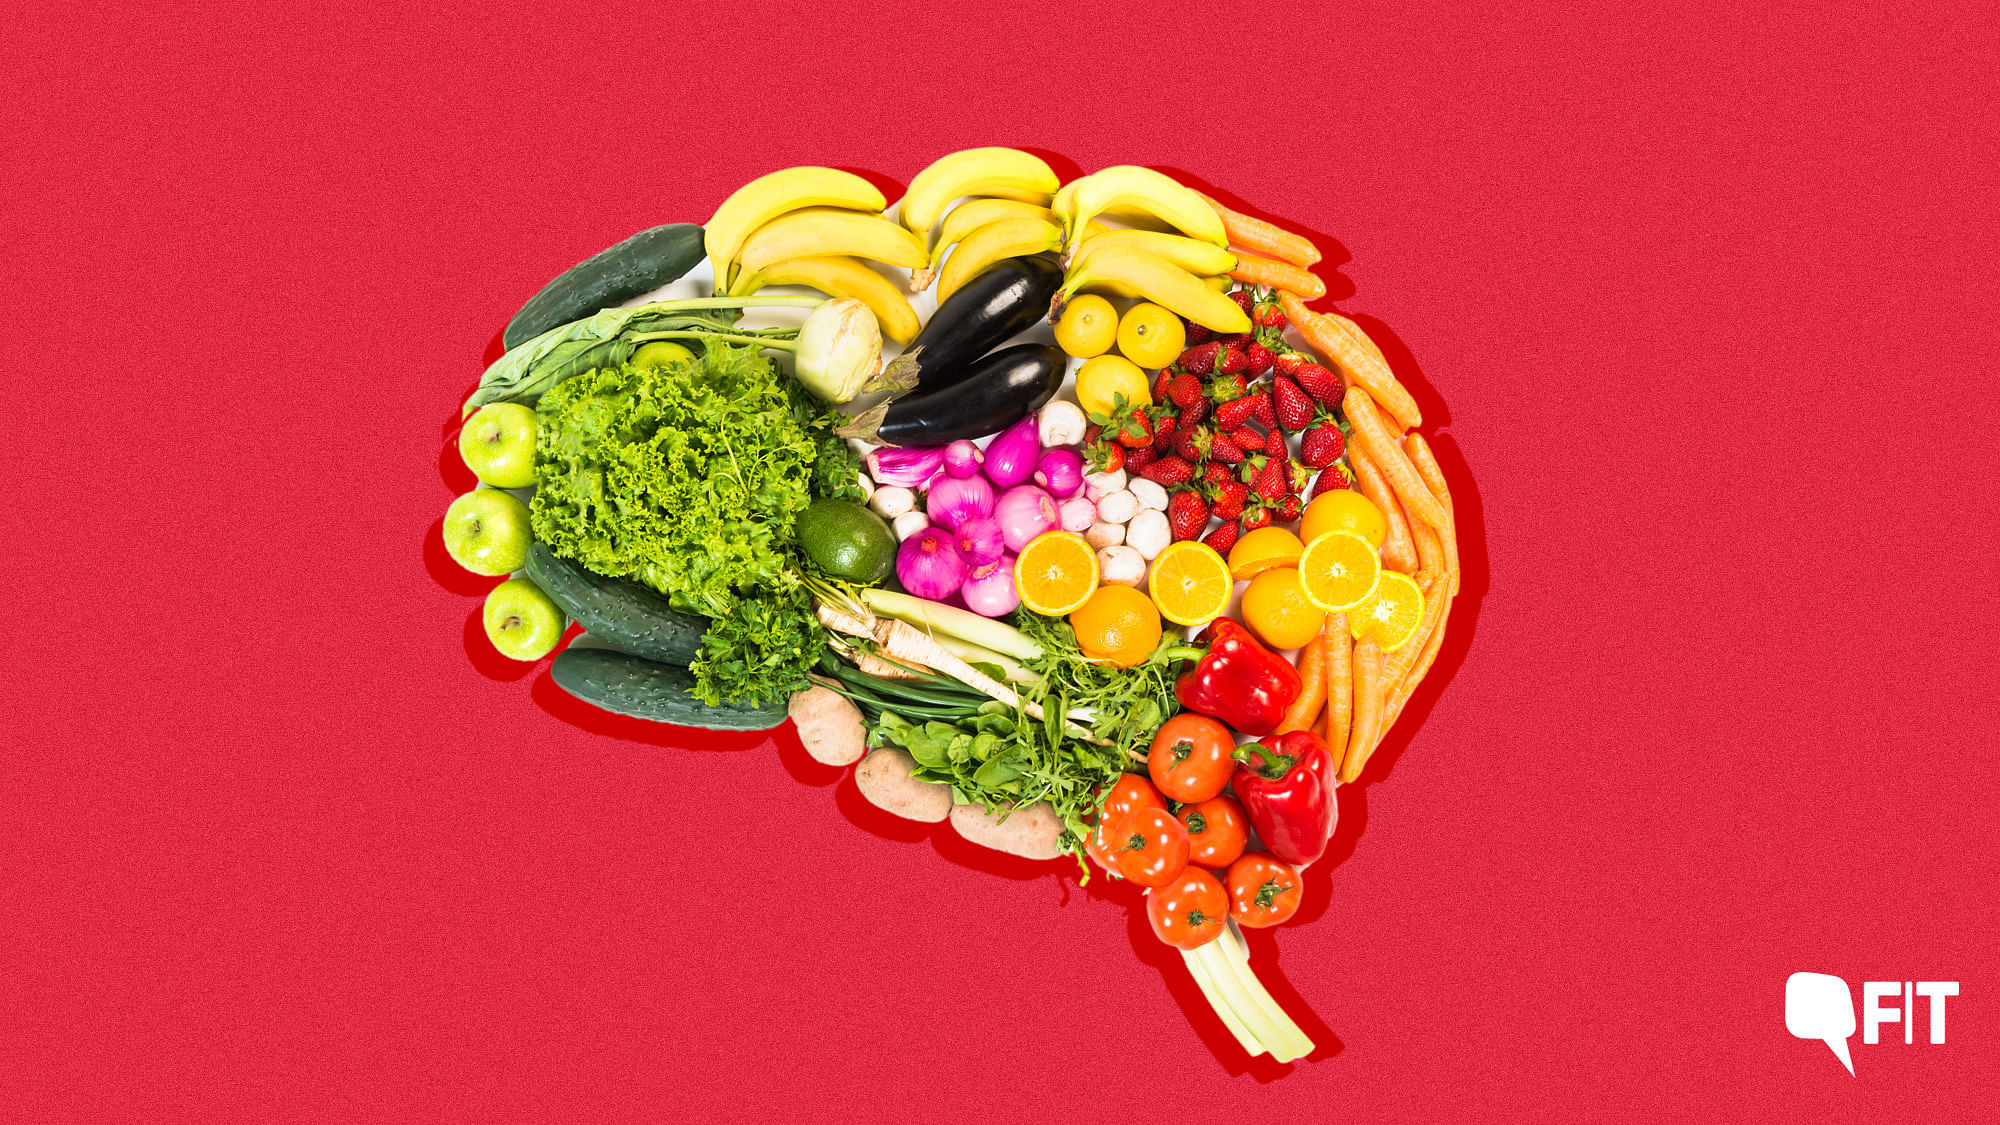 Find out which foods should you add in your daily diet to get your brain buzzing!